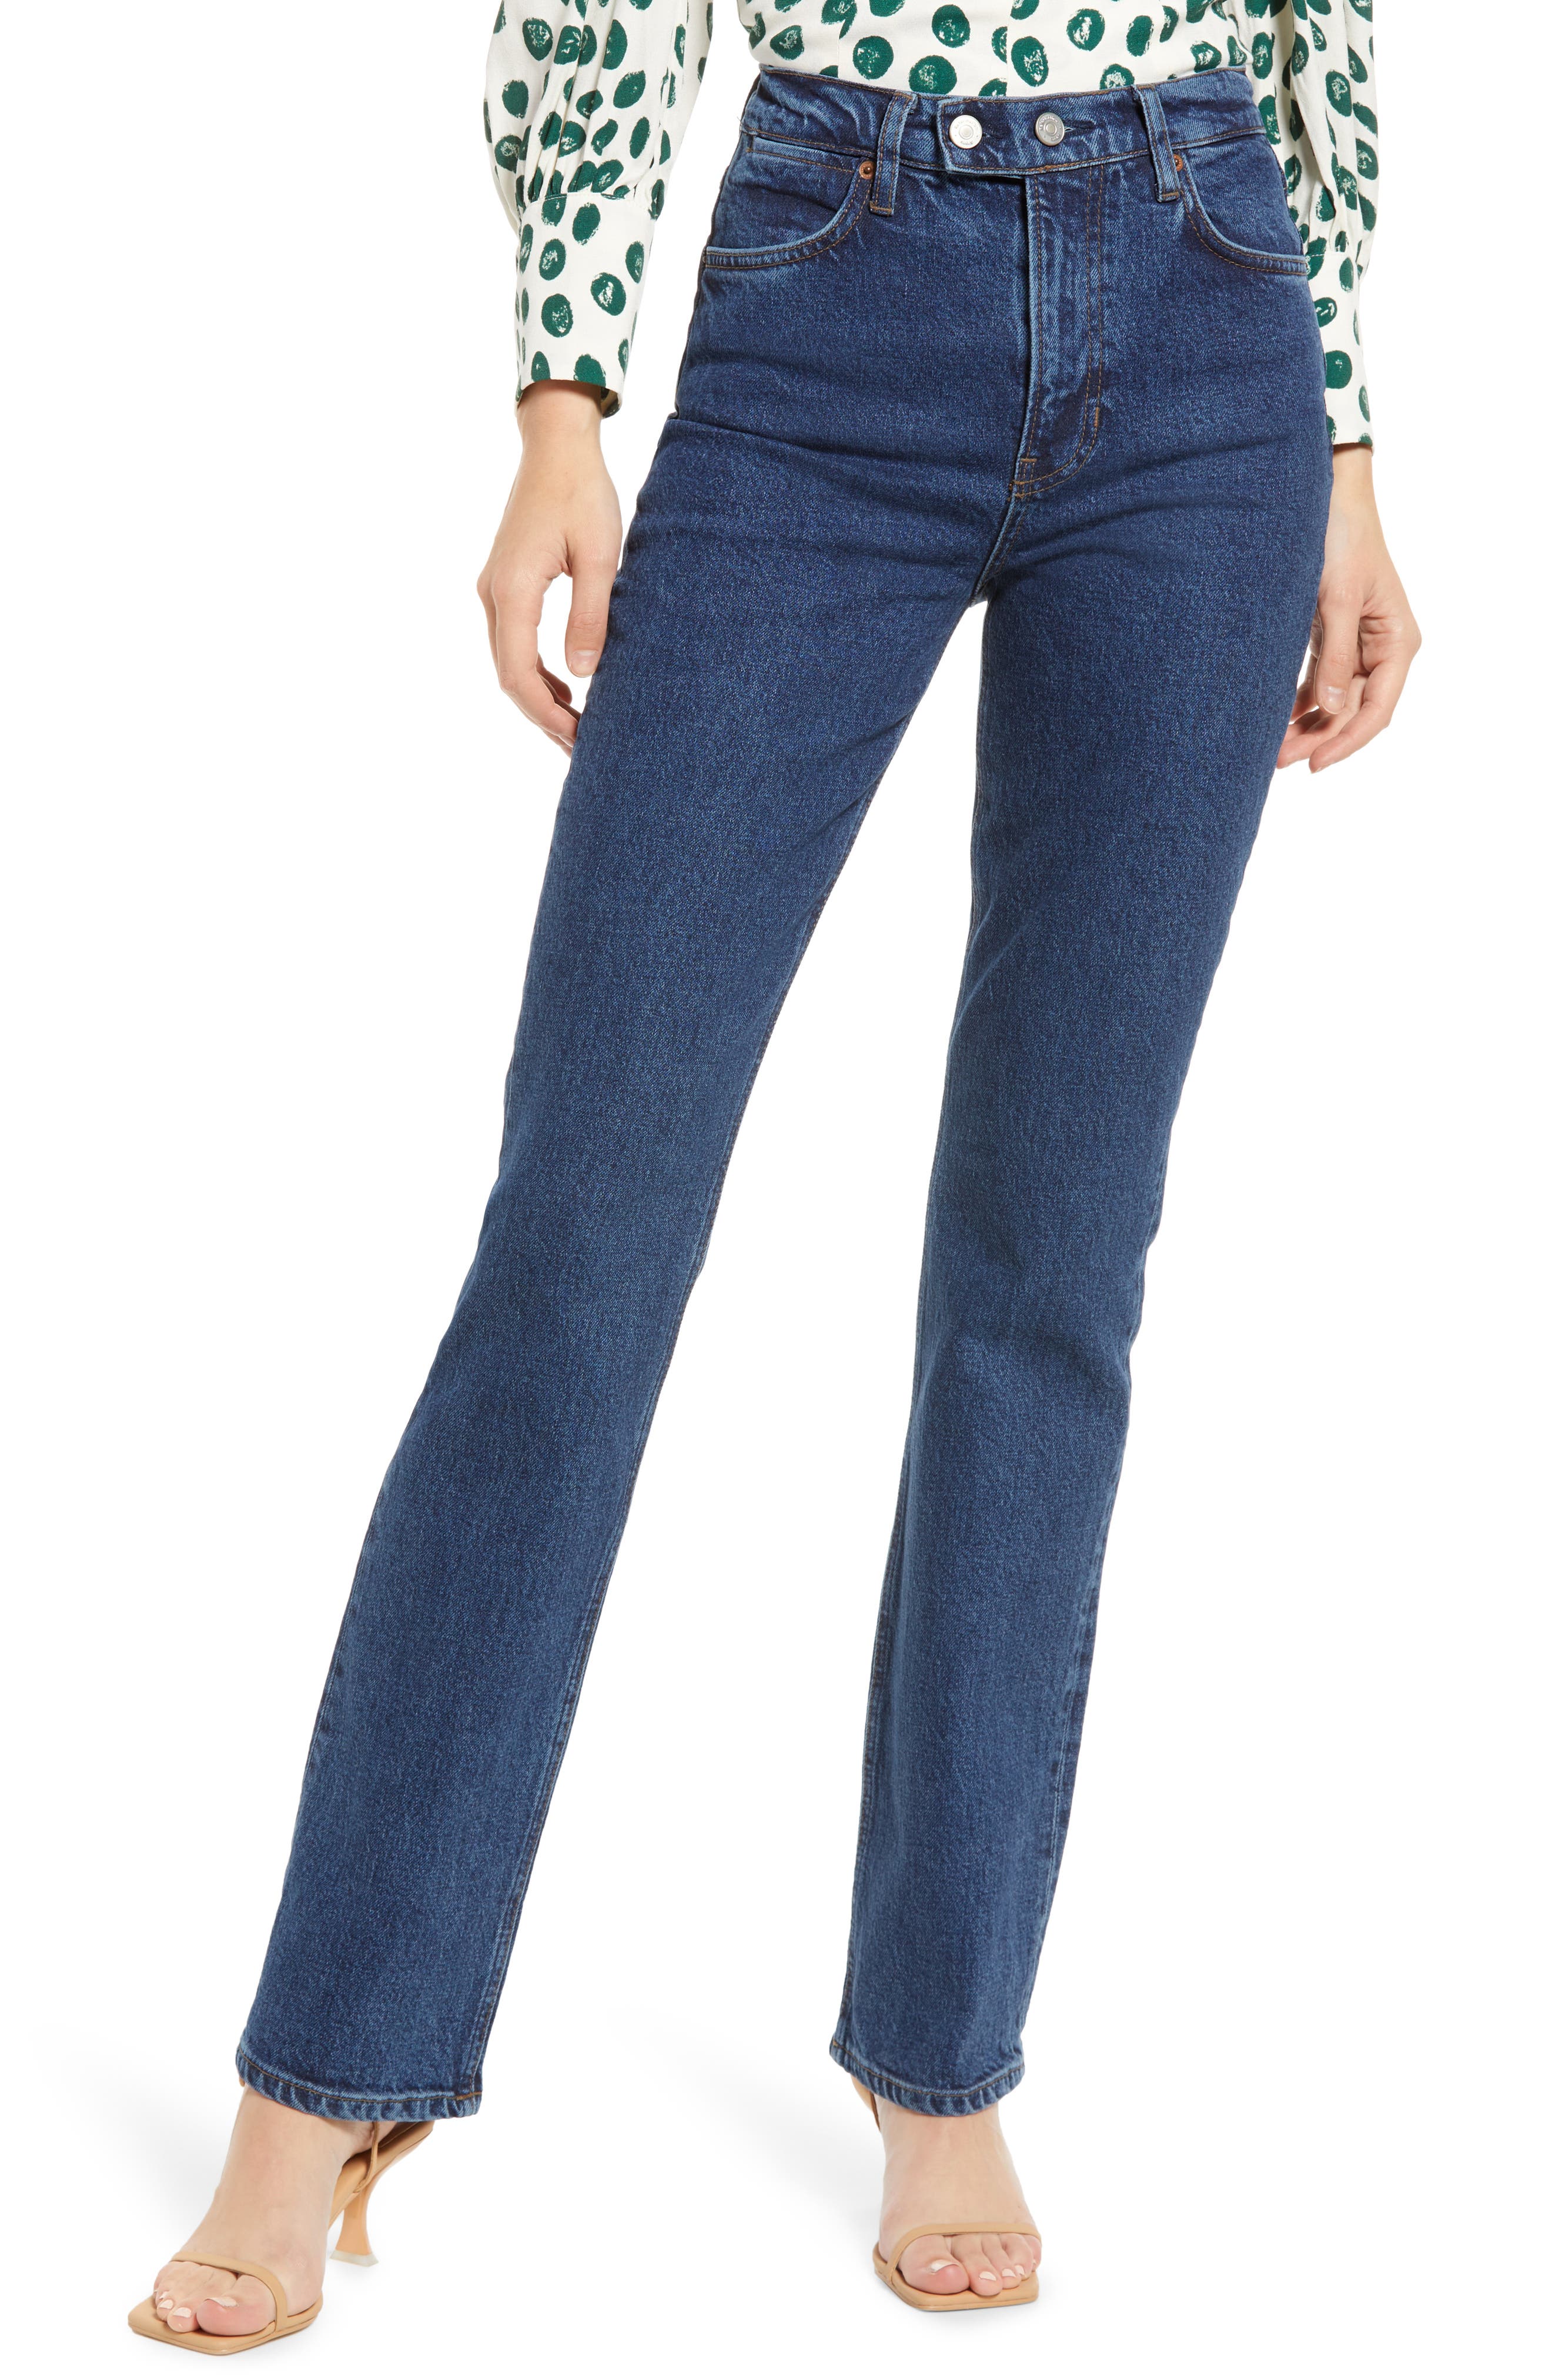 Reformation Donna High Waist Bootcut Jeans in Amani at Nordstrom, Size 29